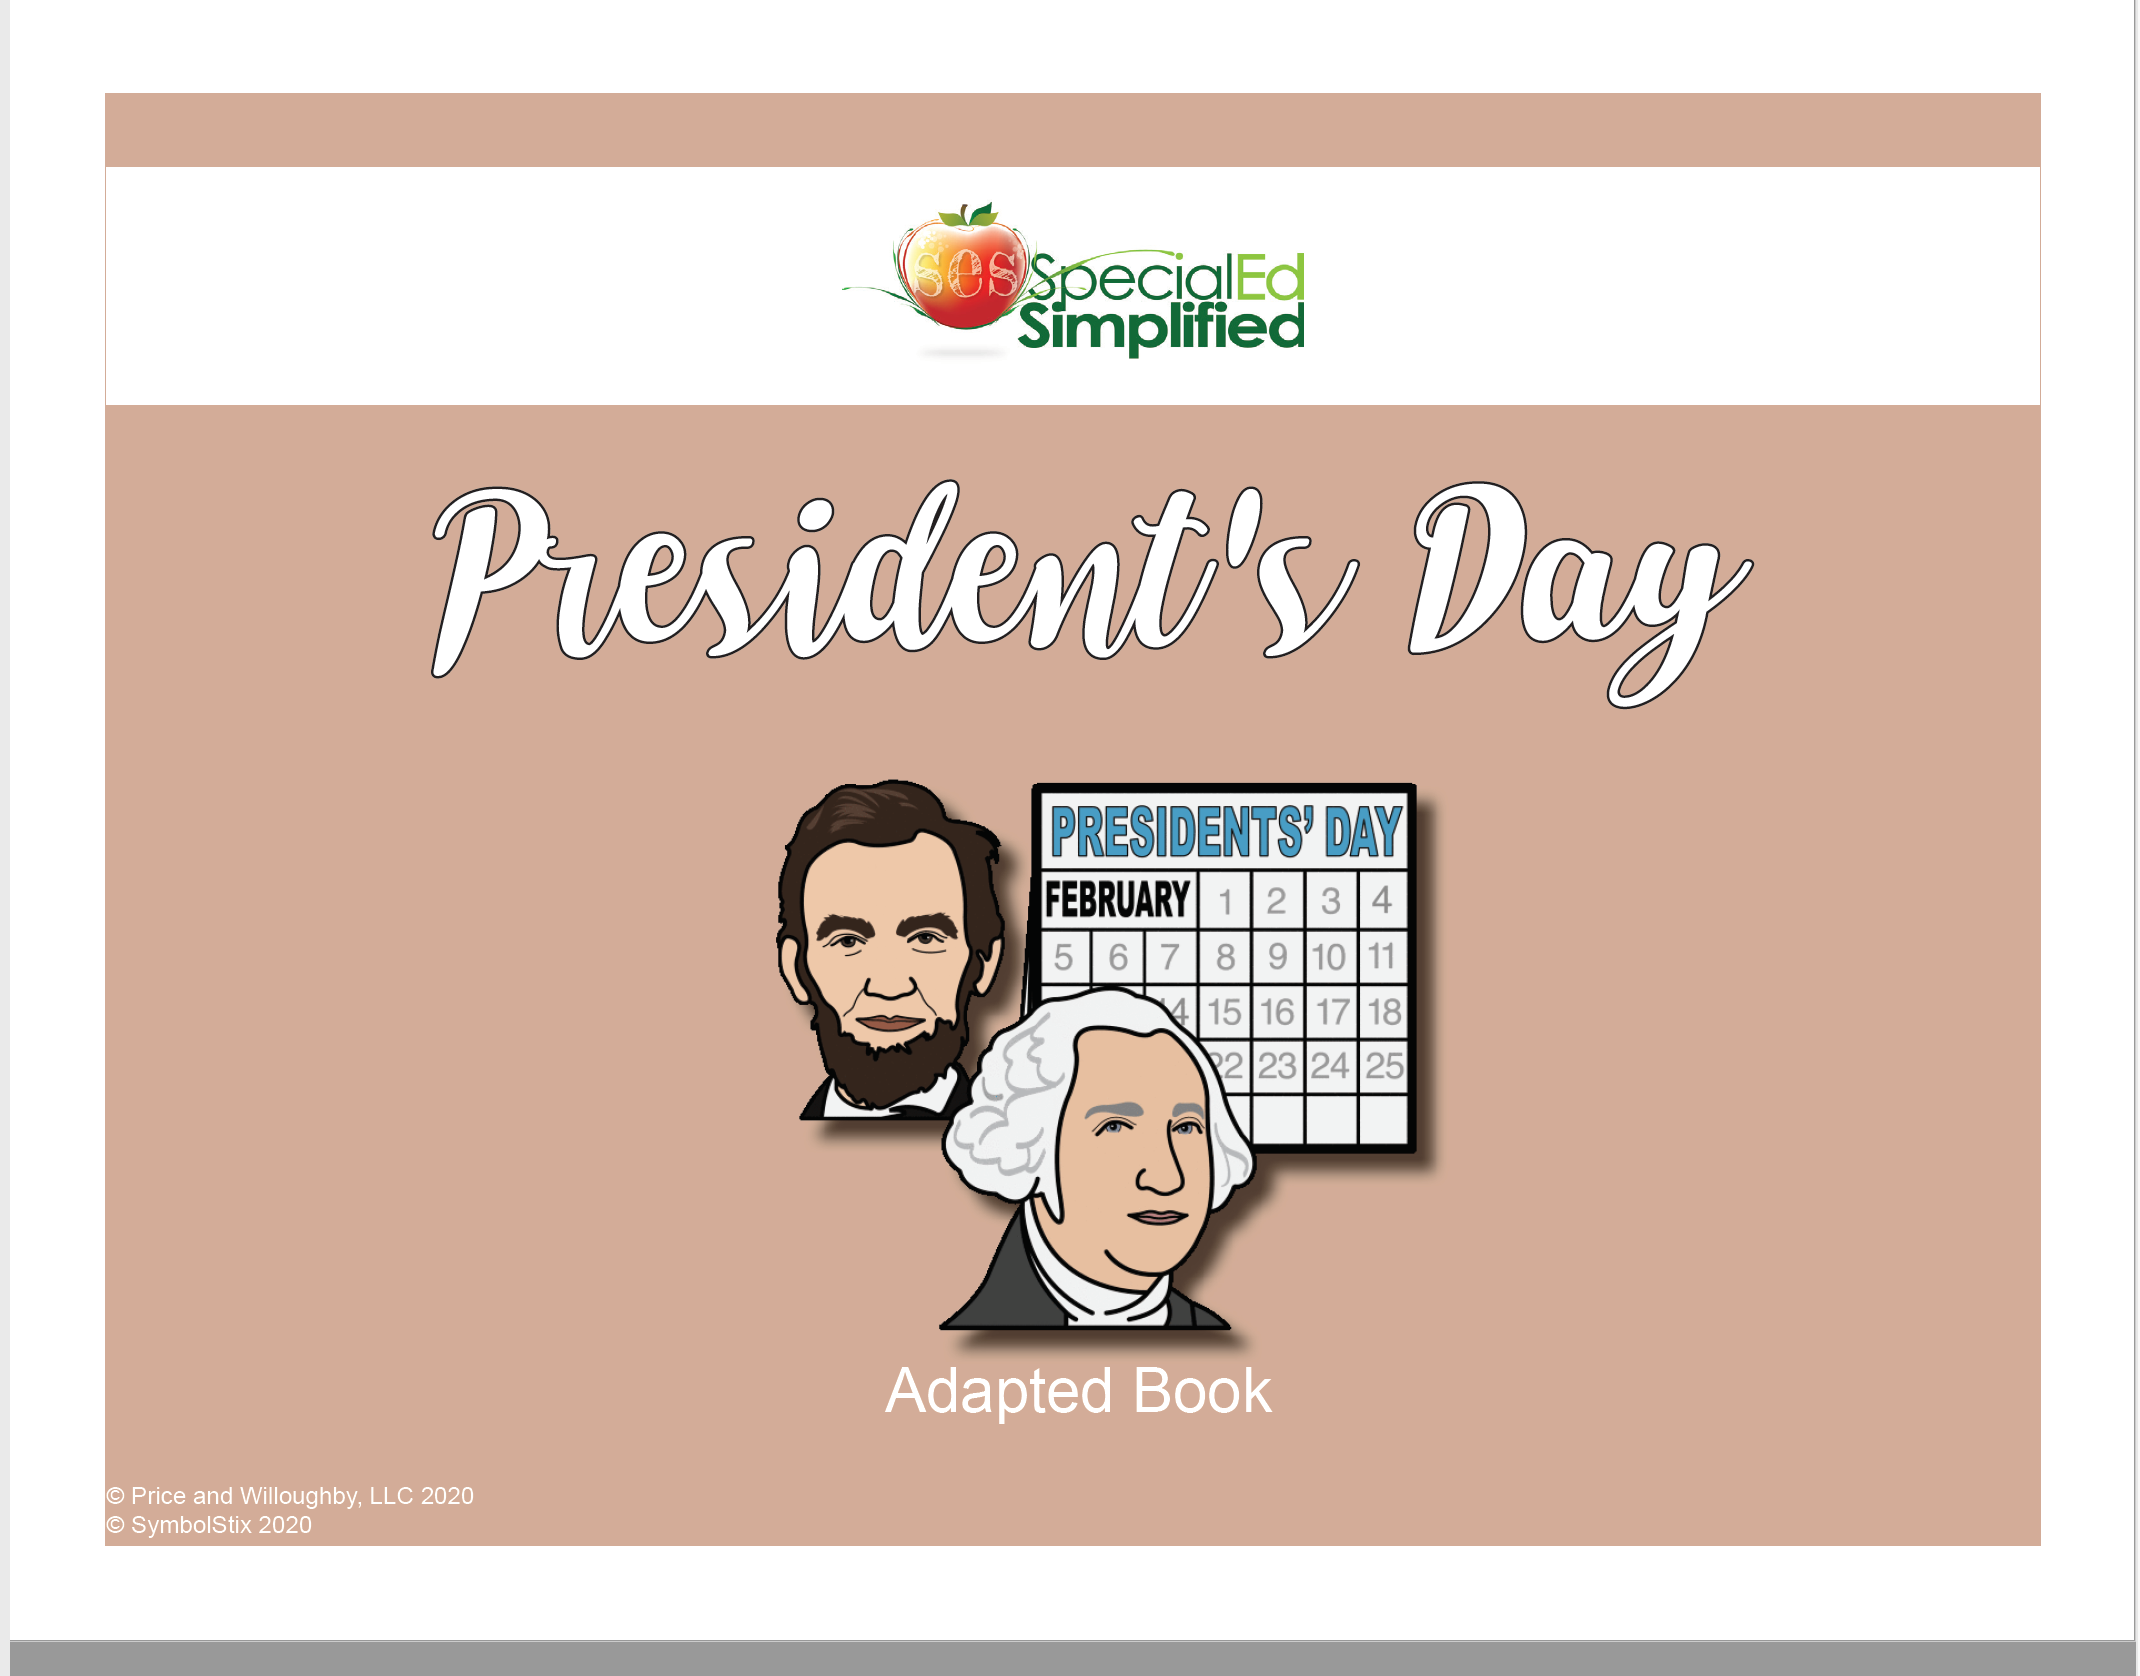 Adapted Book-President's Day